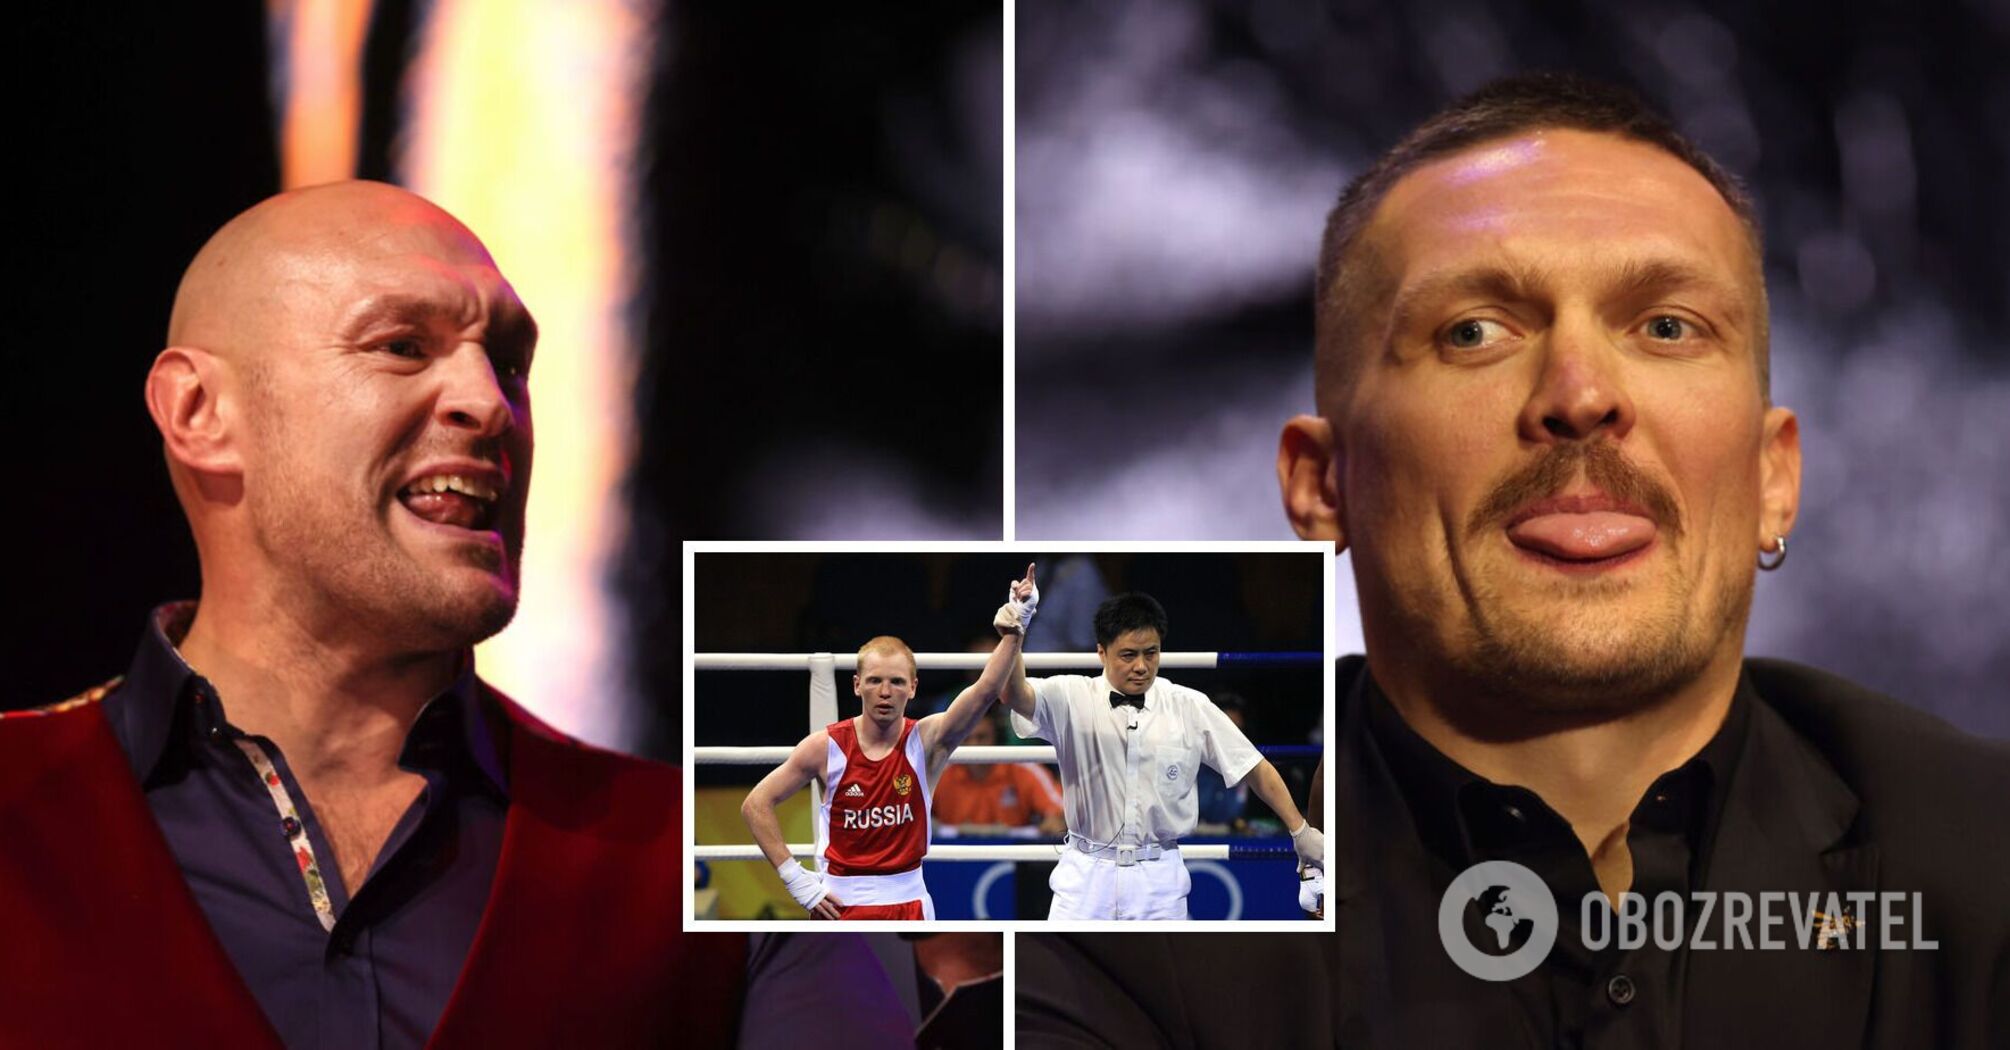 'We categorically do not welcome': Russian boxer speaks about Usyk's victory over Fury, condemning the Ukrainian for supporting the country